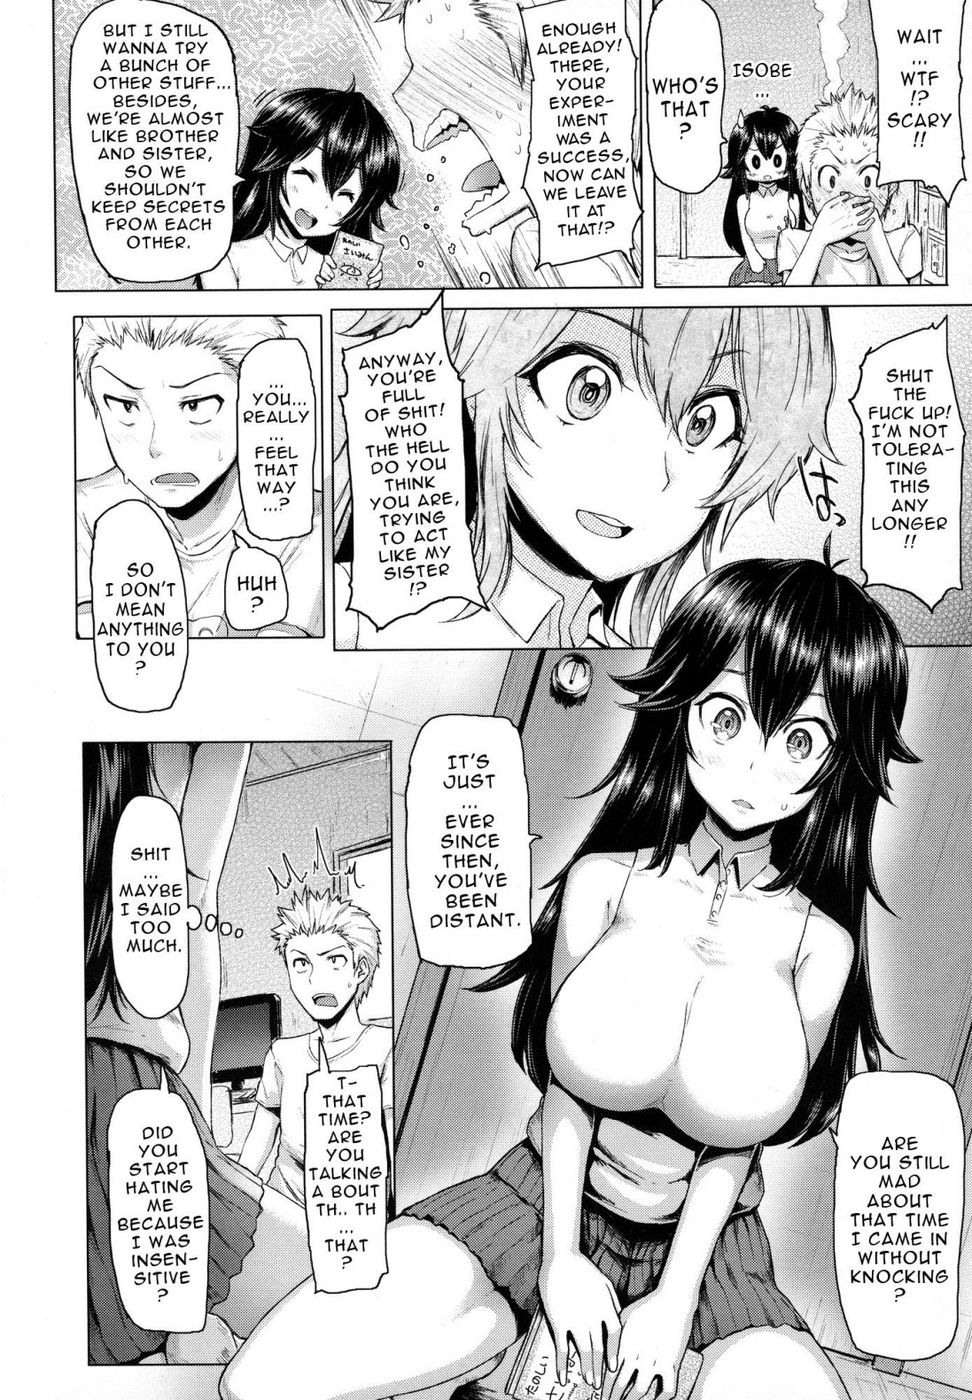 Tentacle Mind Break Hentai - Limit Break 3-Chapter 5-Under Mind Control-Hentai Manga Hentai Comic -  Page: 4 - Online porn video at mobile